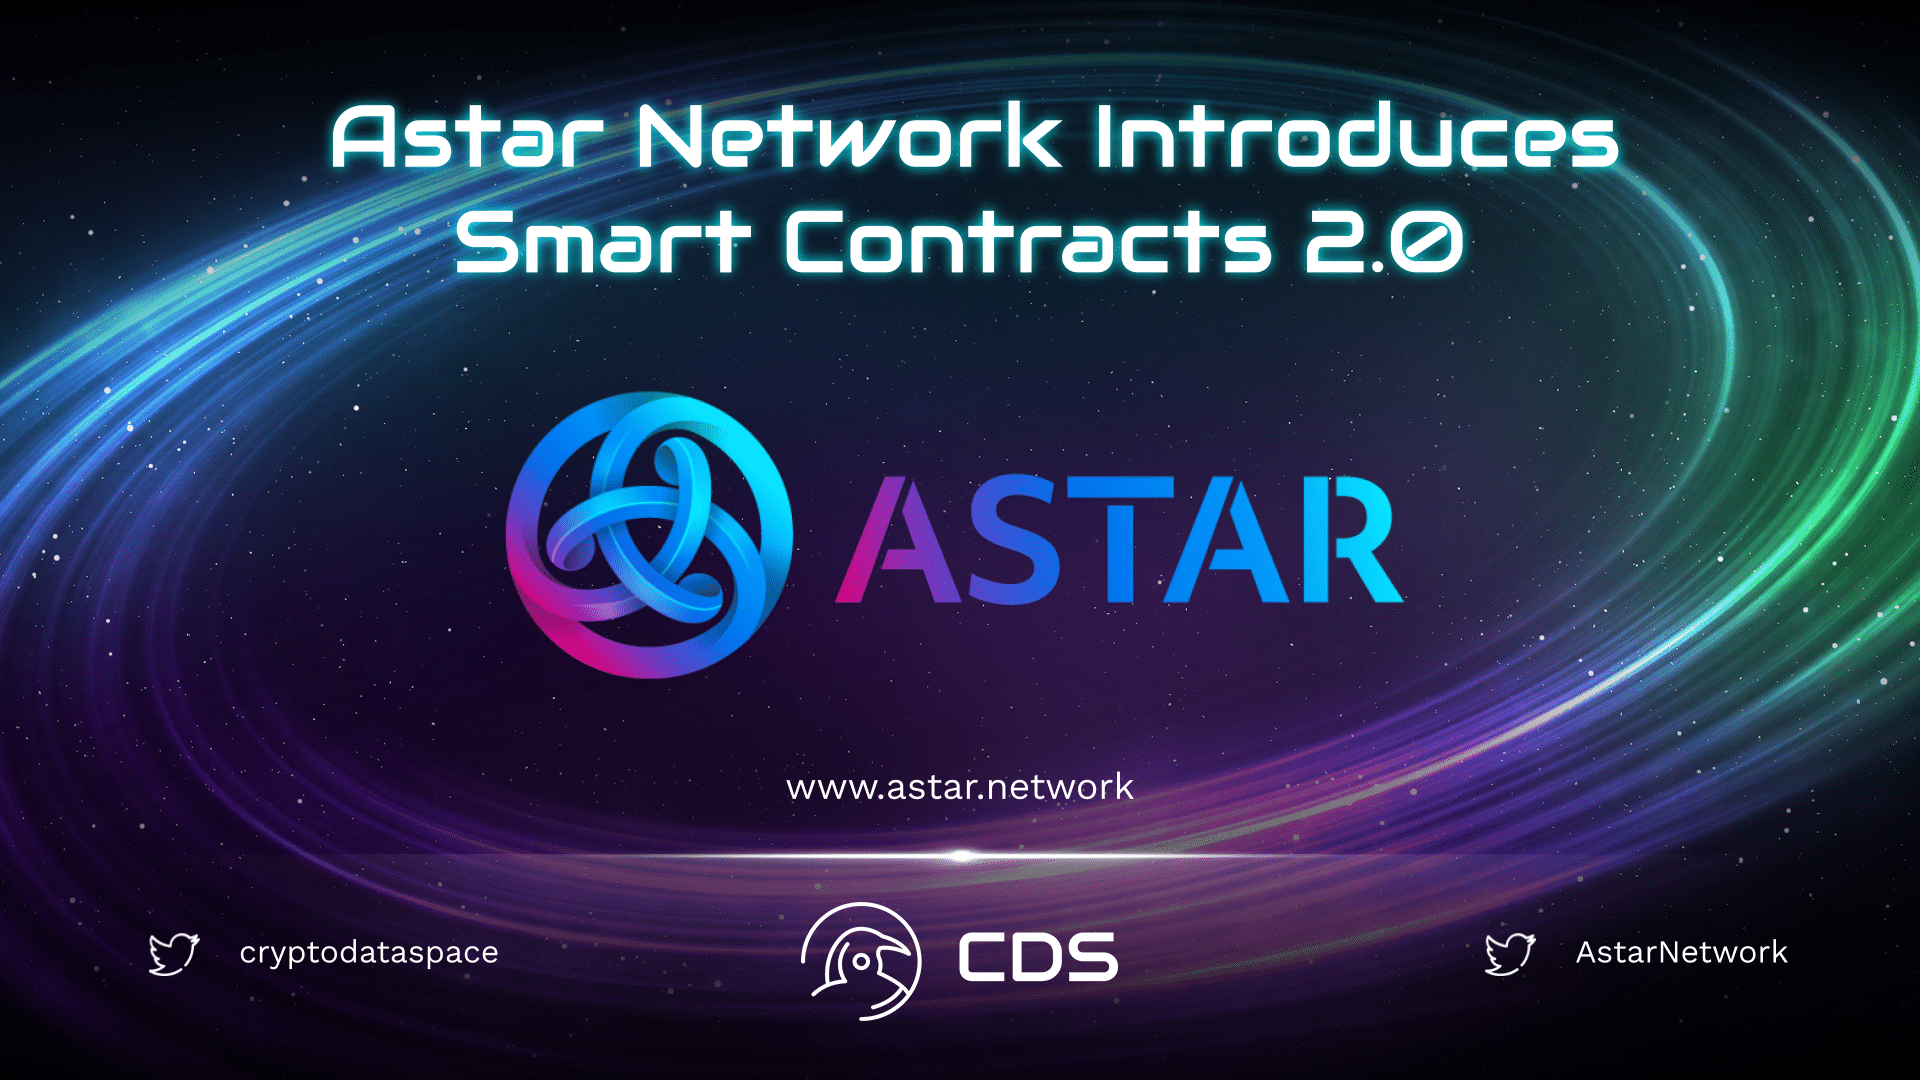 Astar Network Introduces Smart Contracts 2.0